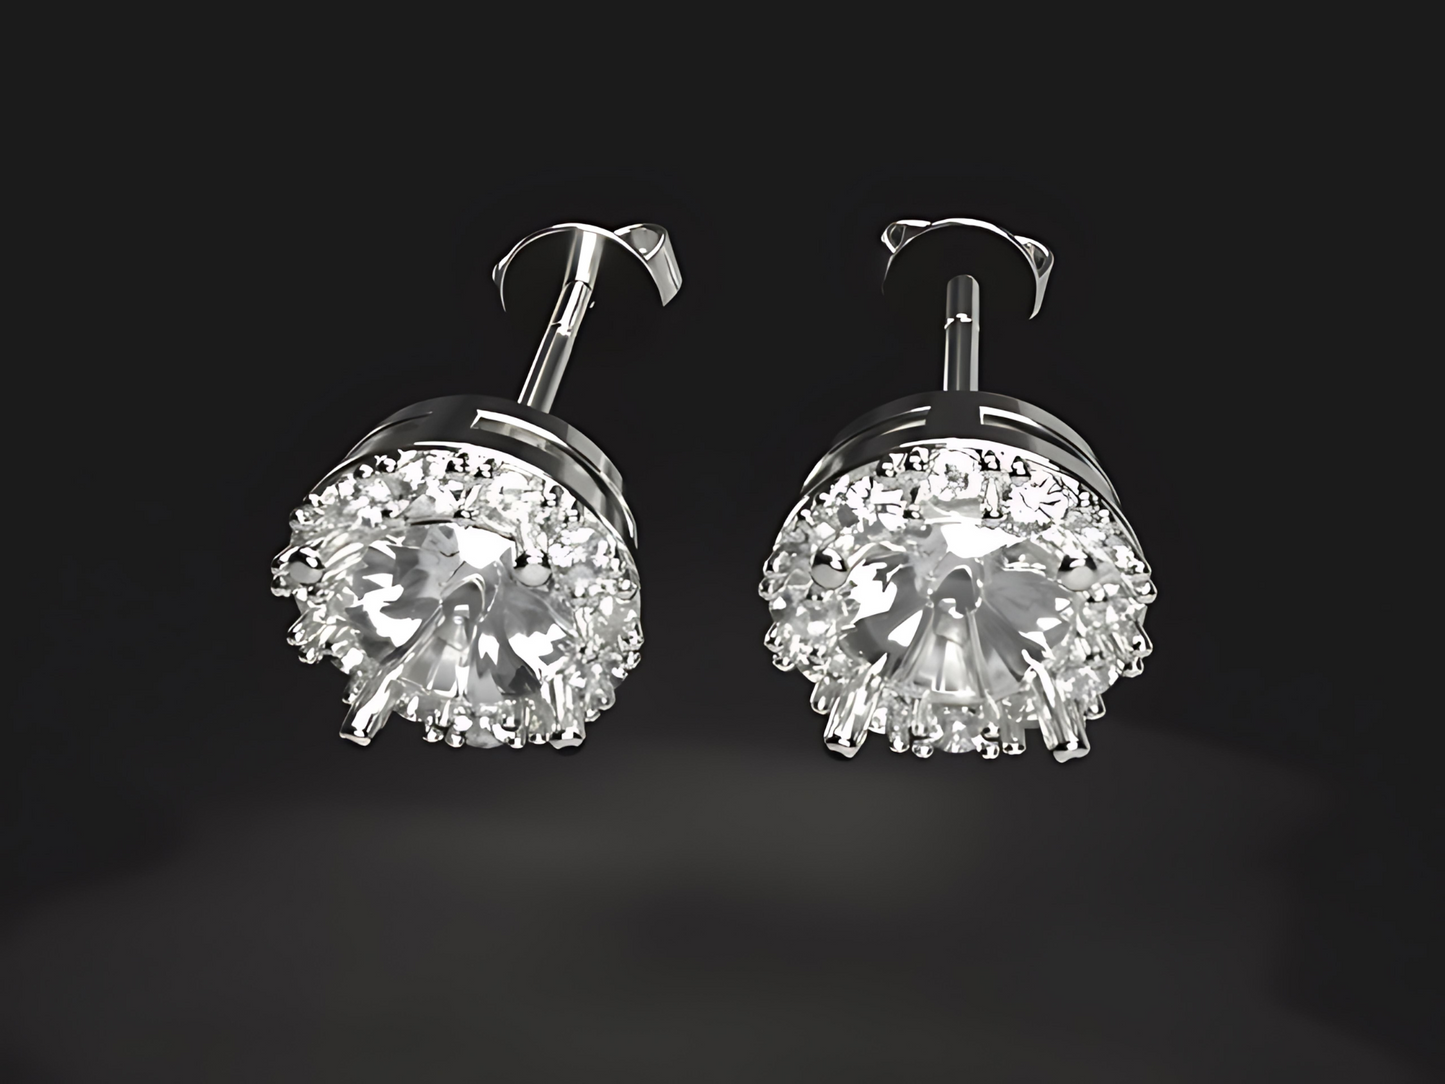 Handmade gold earrings with natural 1.48 ct. Vs high quality Diamonds, halo style.